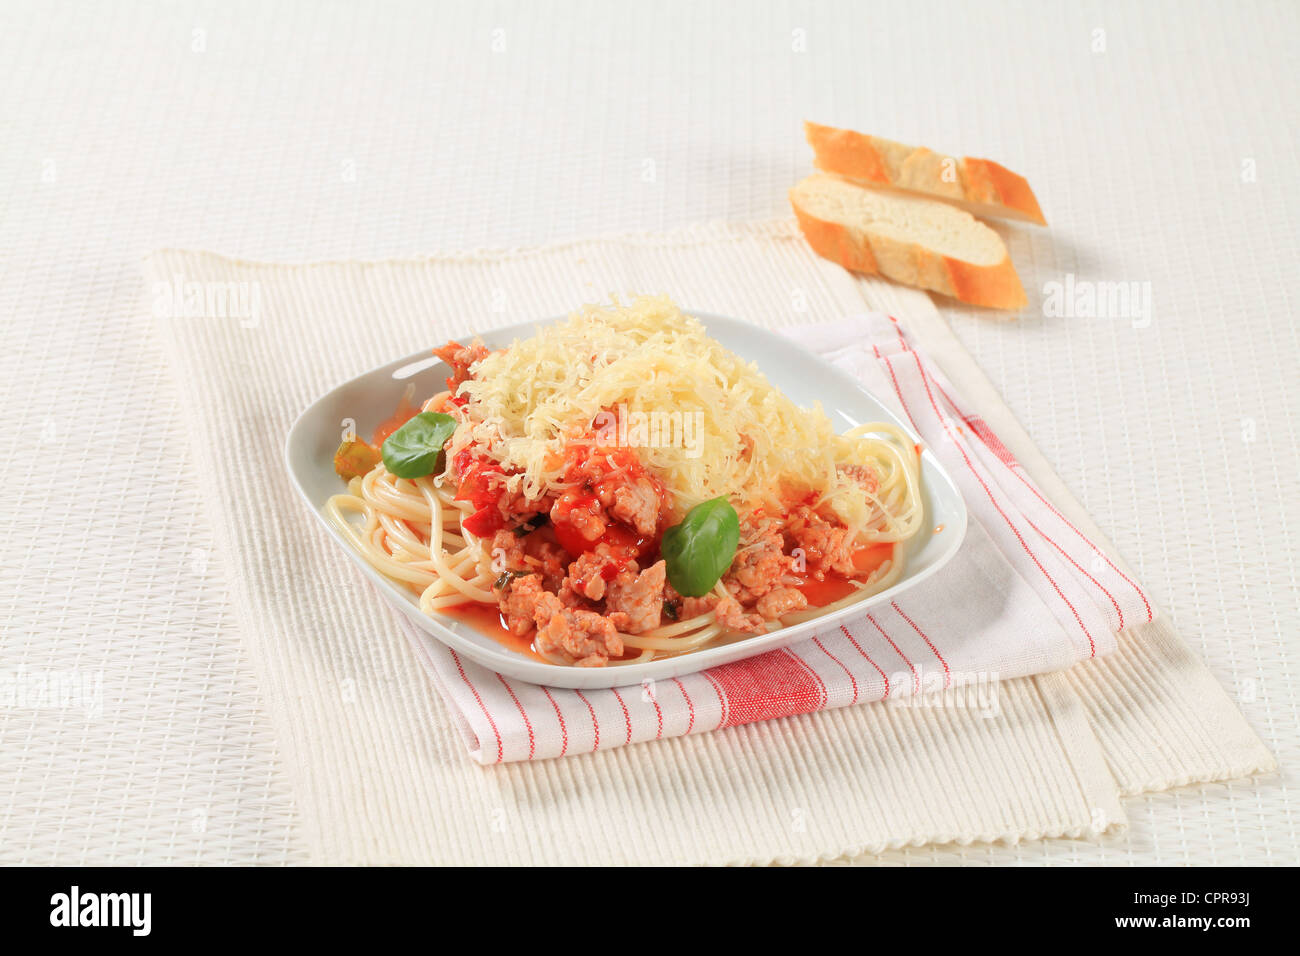 Spaghetti with minced meat and tomato sprinkled with cheese Stock Photo